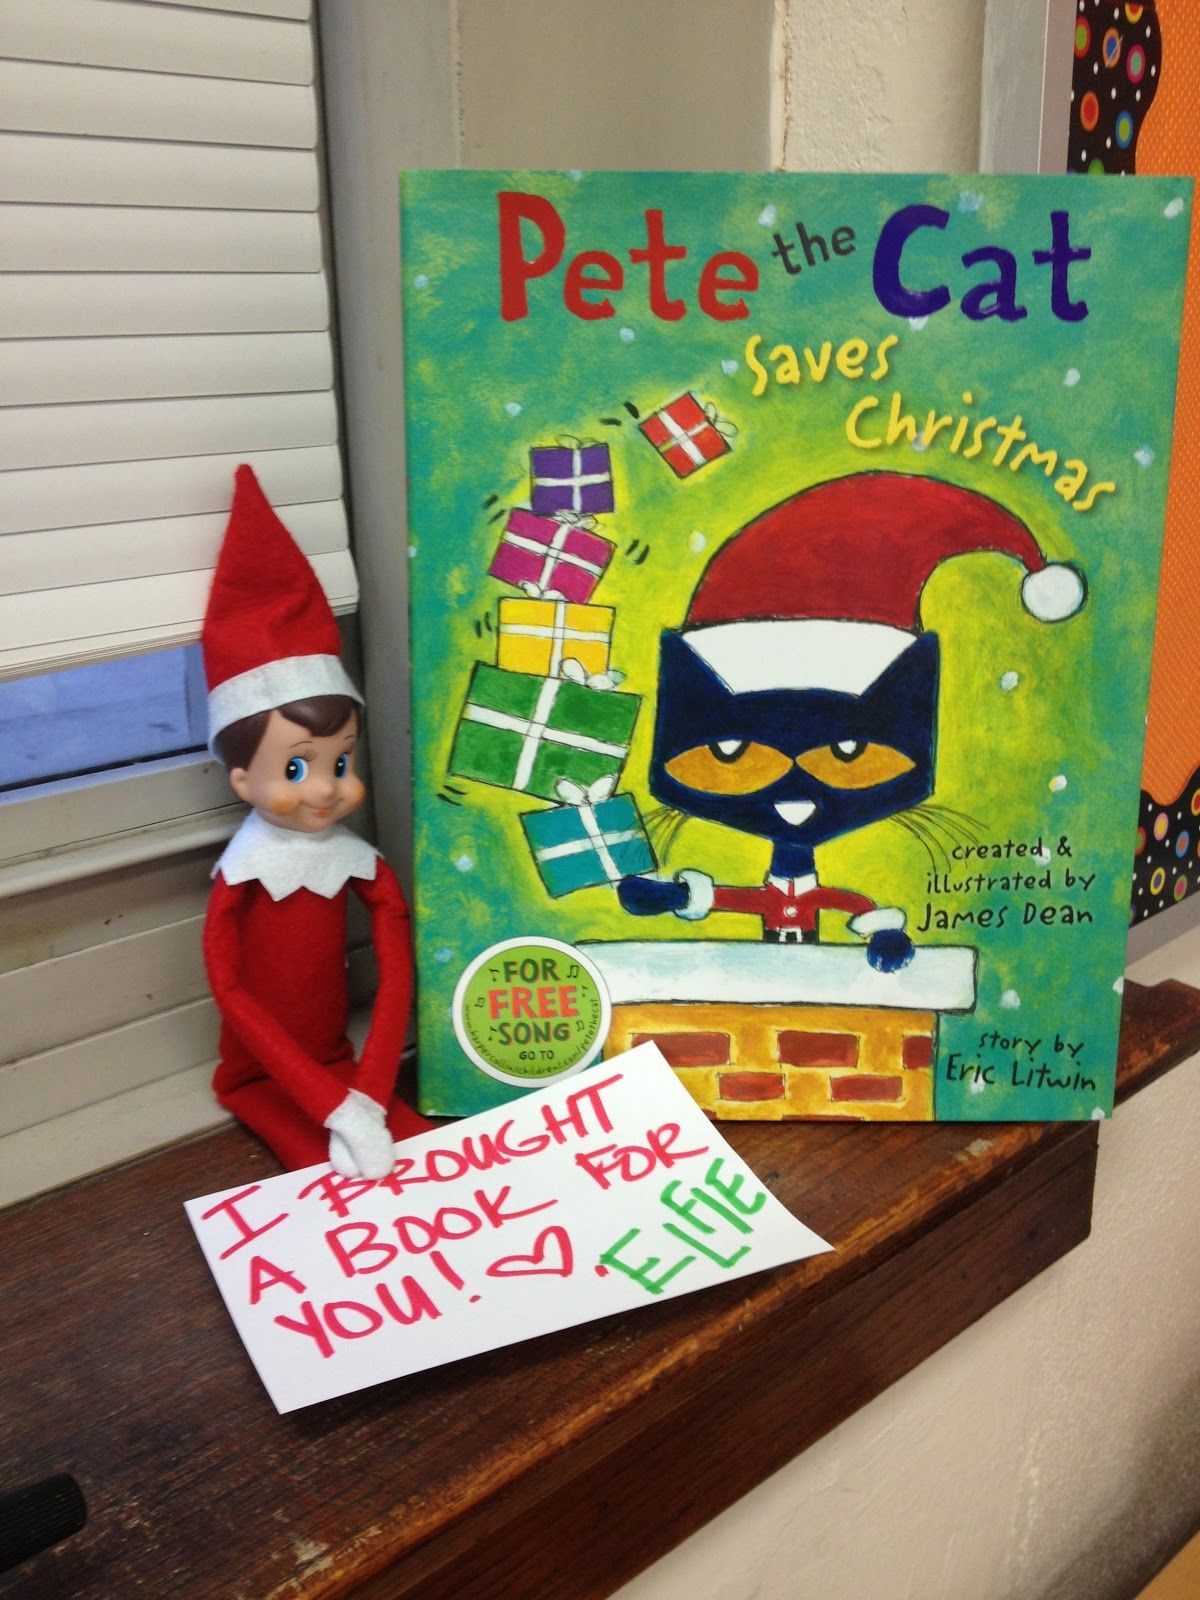 Elf on the Shelf brings a book  (This one is already planned! He is going to be ha